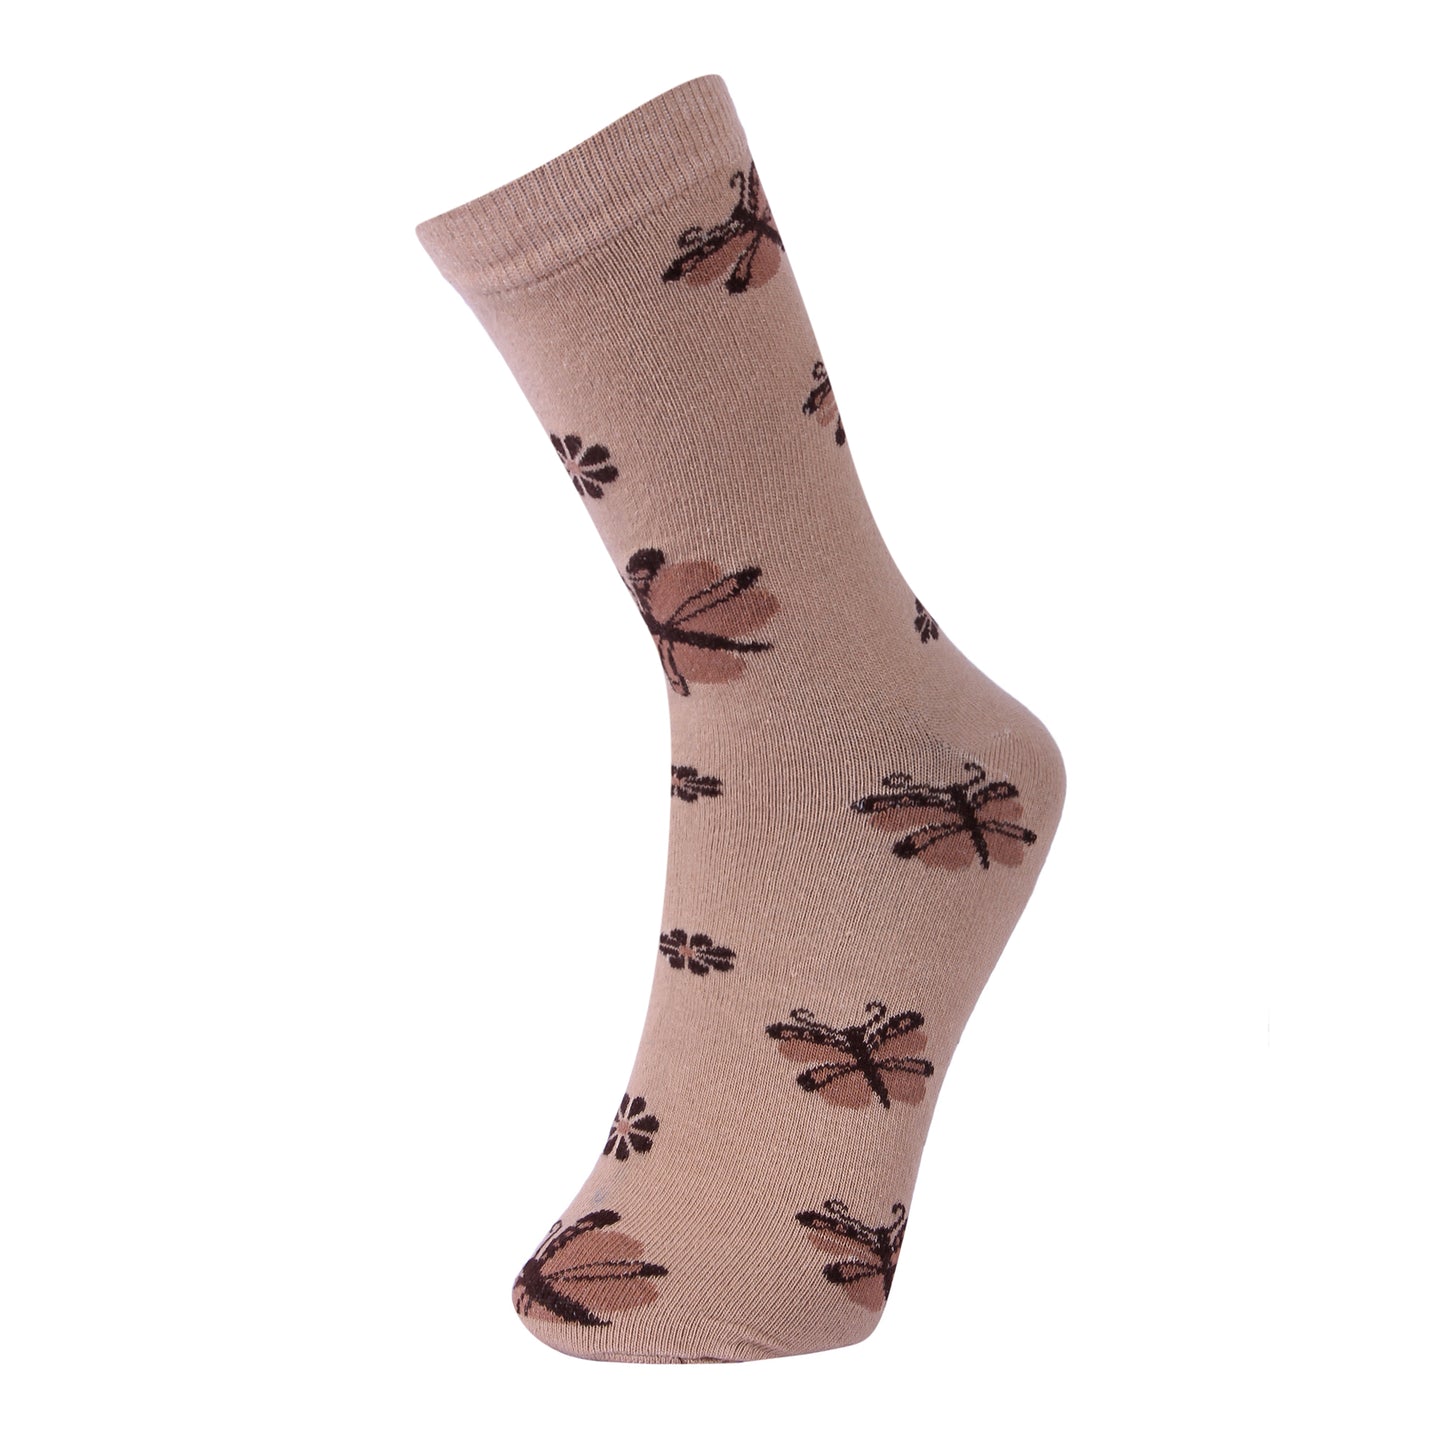 Women's Casual Socks Floral design-Pack of 3pairs